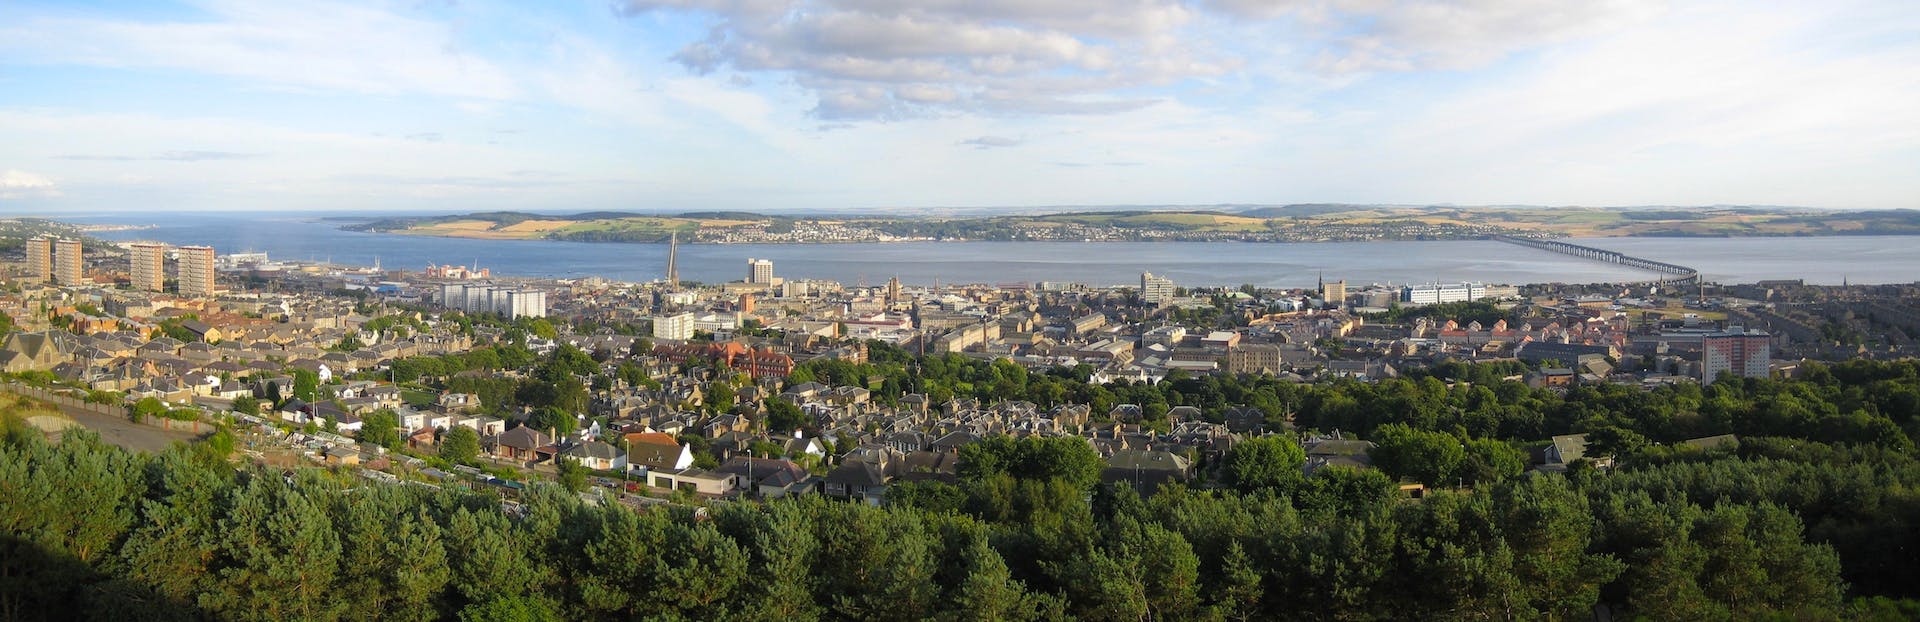 Explore Dundee on a self-guided audio tour